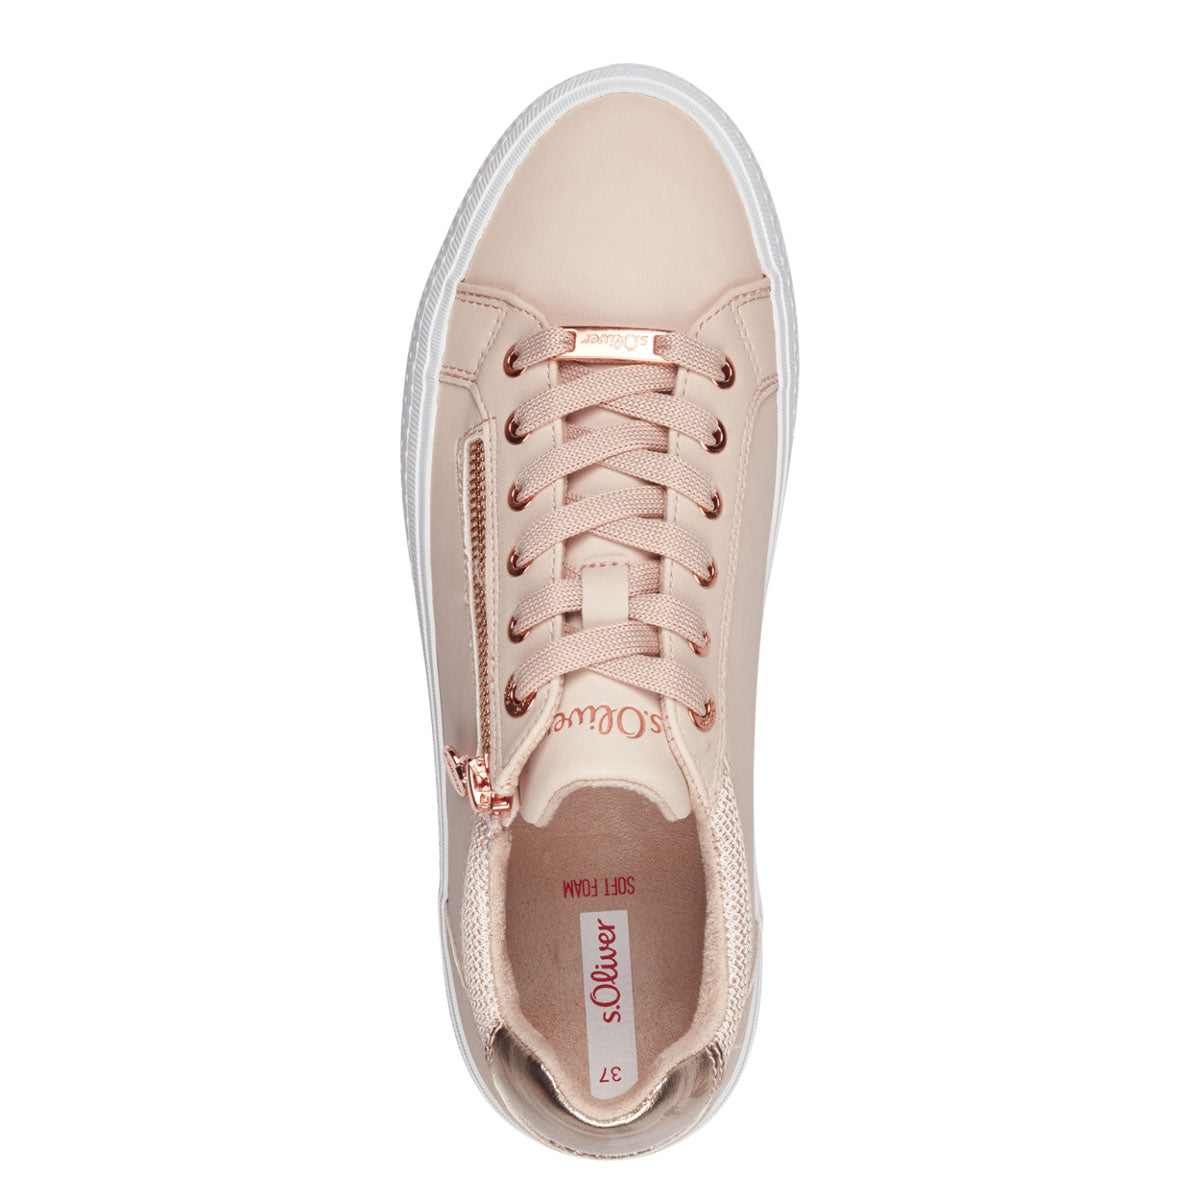 S. Oliver Rose Pink Runner: Chic Comfort in Every Step